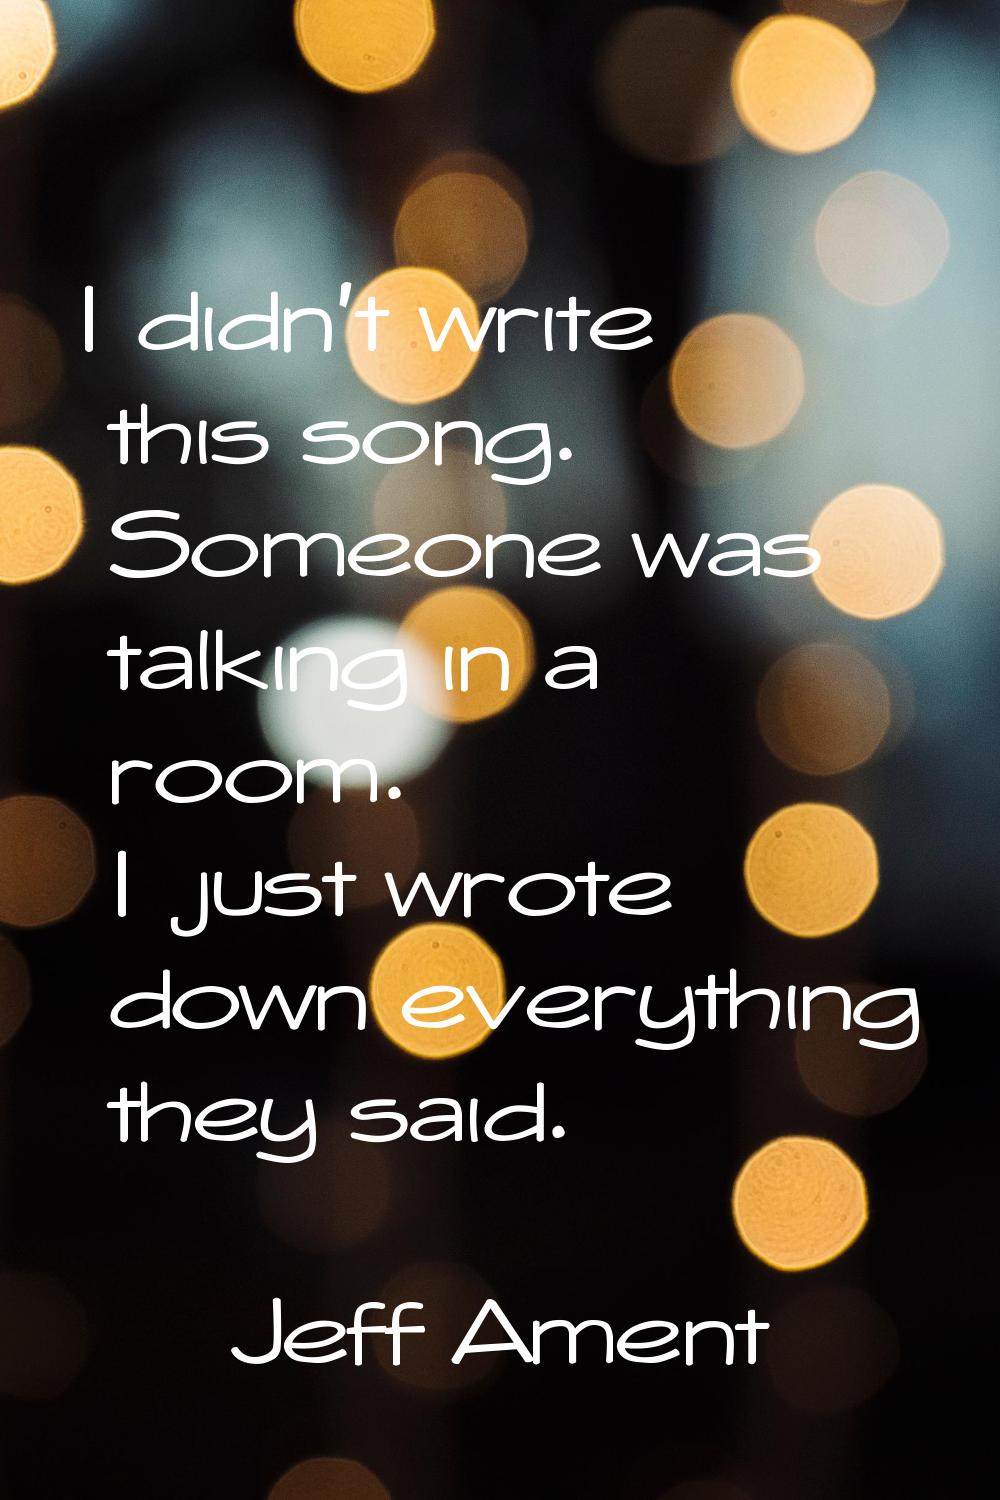 I didn't write this song. Someone was talking in a room. I just wrote down everything they said.